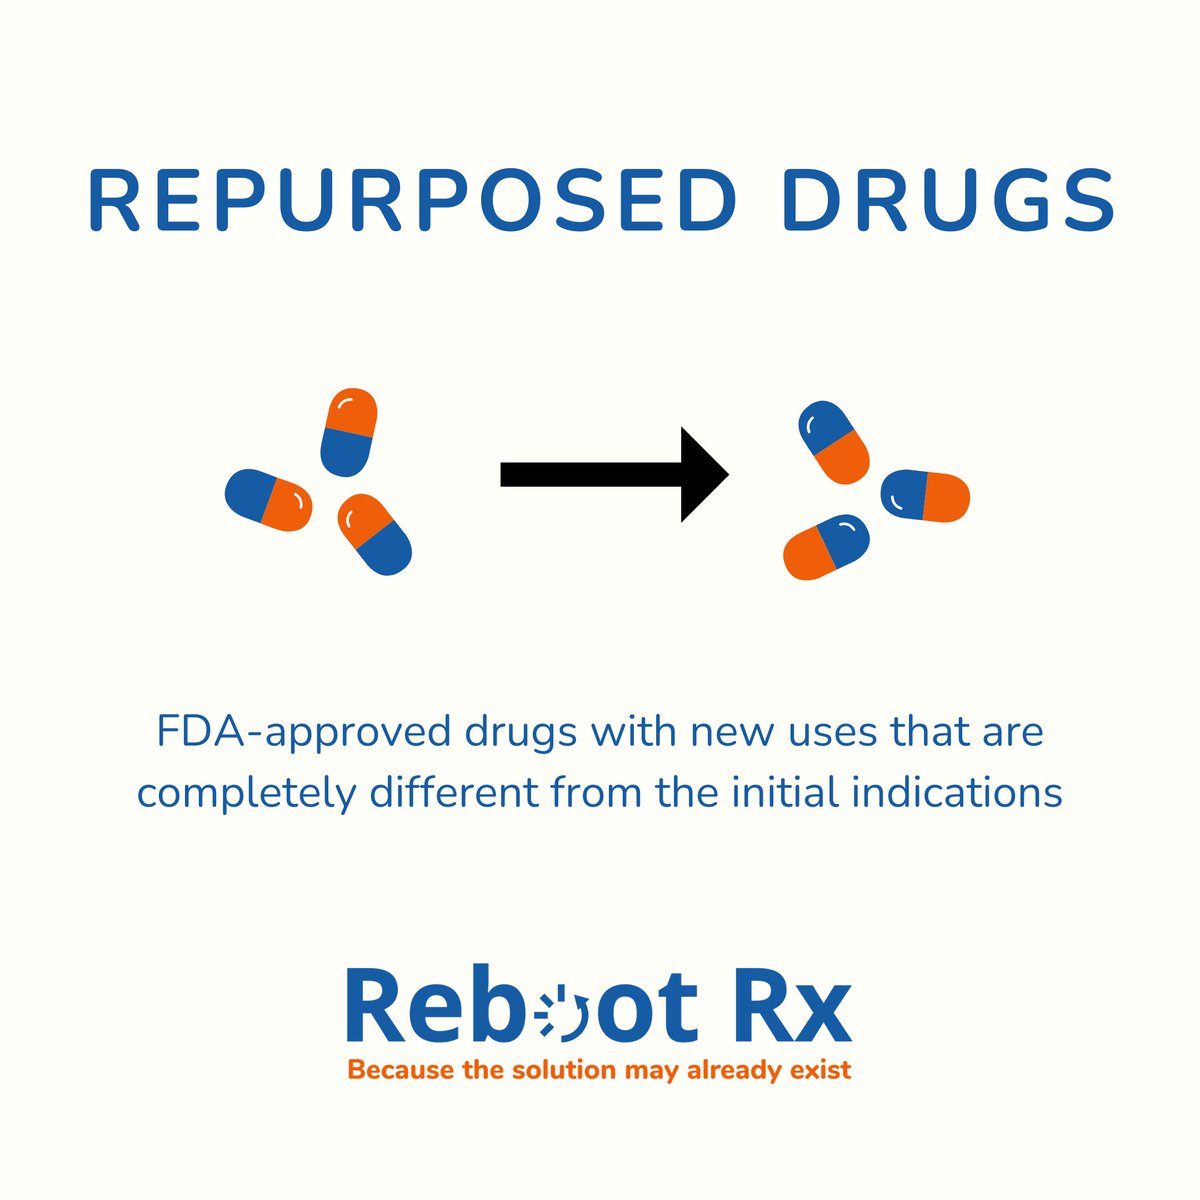 We are often asked for examples of successful #drugrepurposing. Over the next few weeks, we will spotlight a few non-cancer drugs that have been repurposed as effective #cancer therapies. You may be surprised to learn how these familiar drugs have taken on new, life-saving roles.